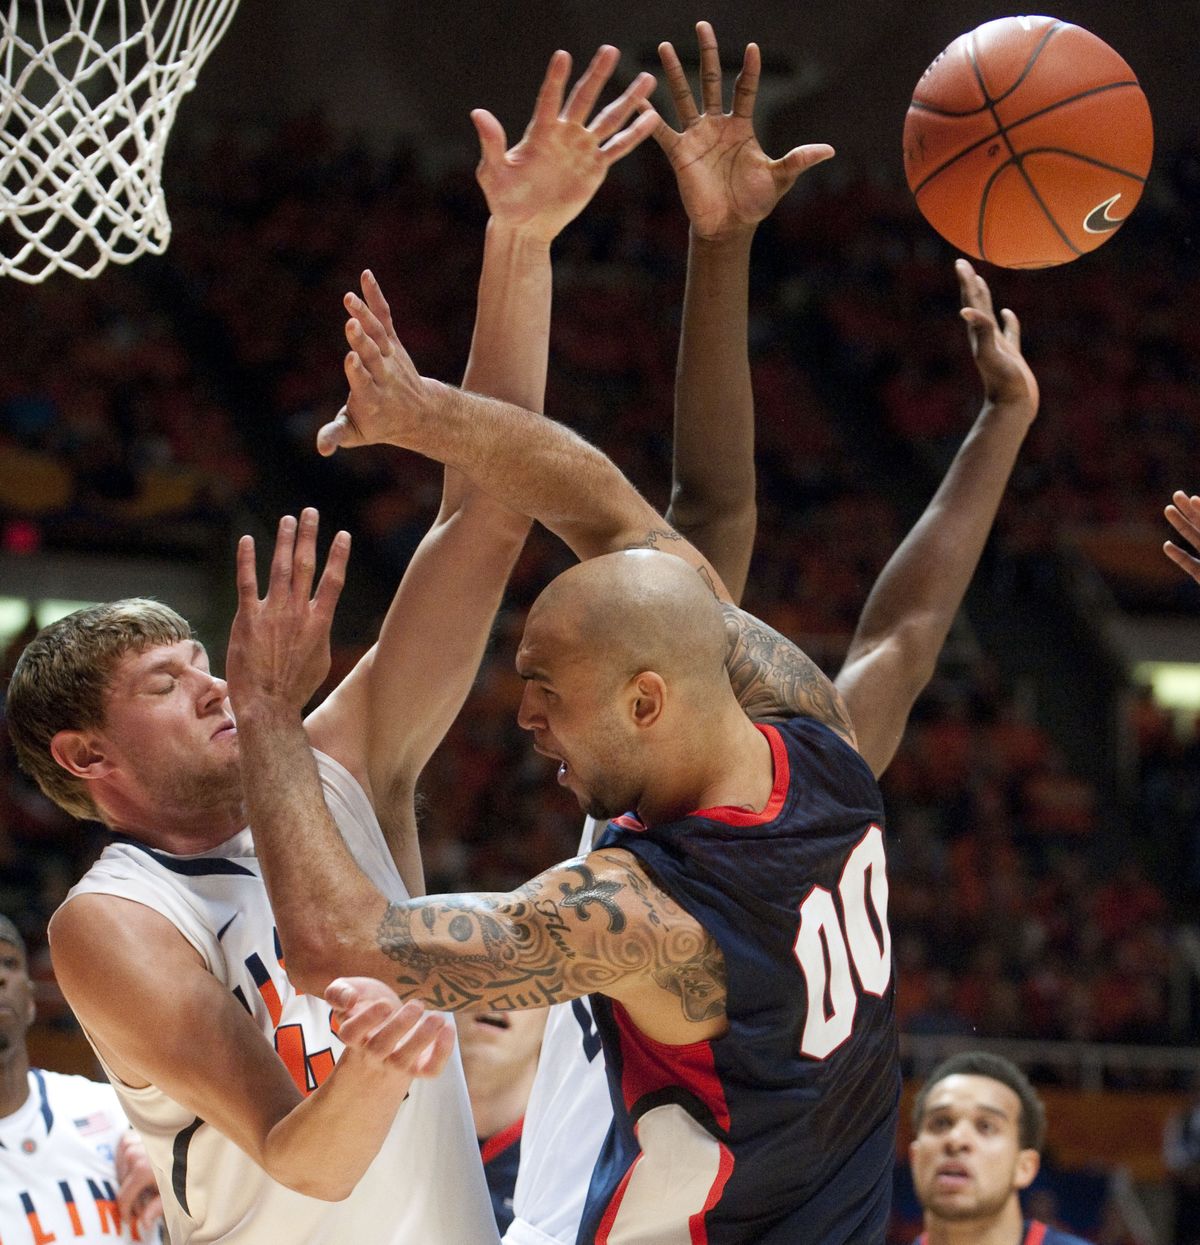 Illinois’ Tyler Griffey, left, clashes with Gonzaga’s Robert Sacre. (Associated Press)